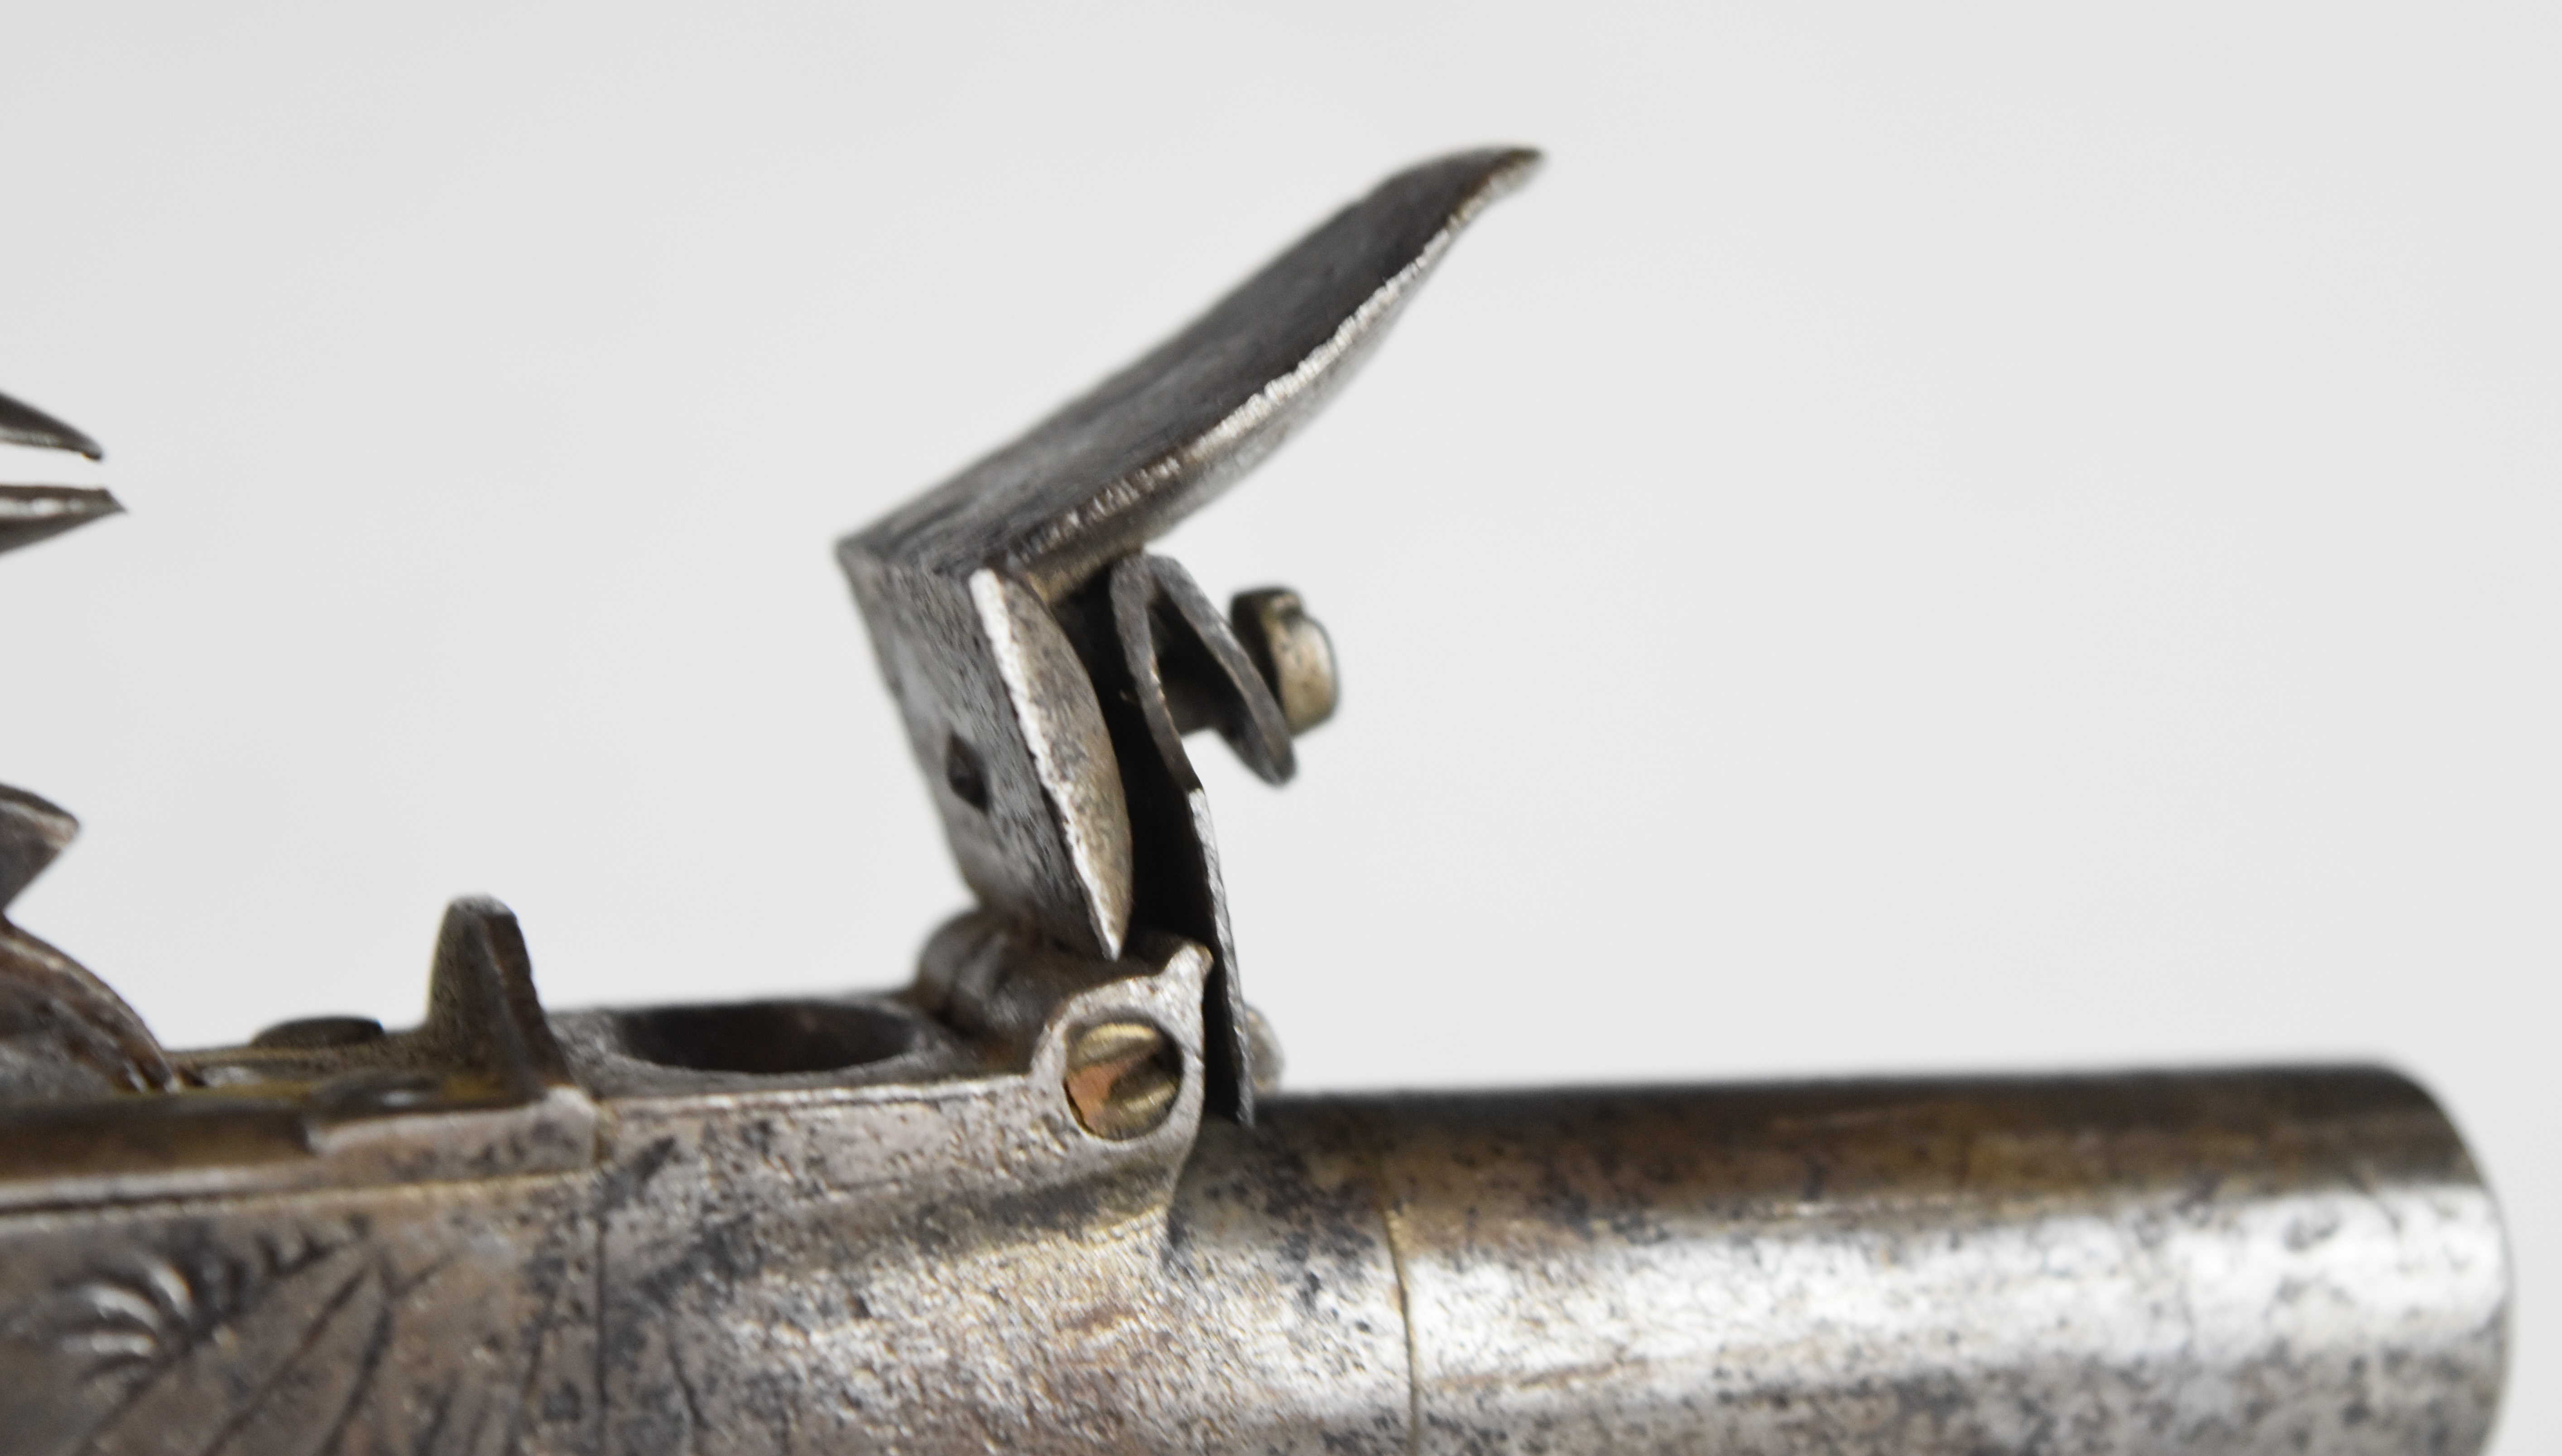 Unnamed 40 bore flintlock pocket pistol with engraved lock, wooden grip and 2 inch turn-off - Image 11 of 12